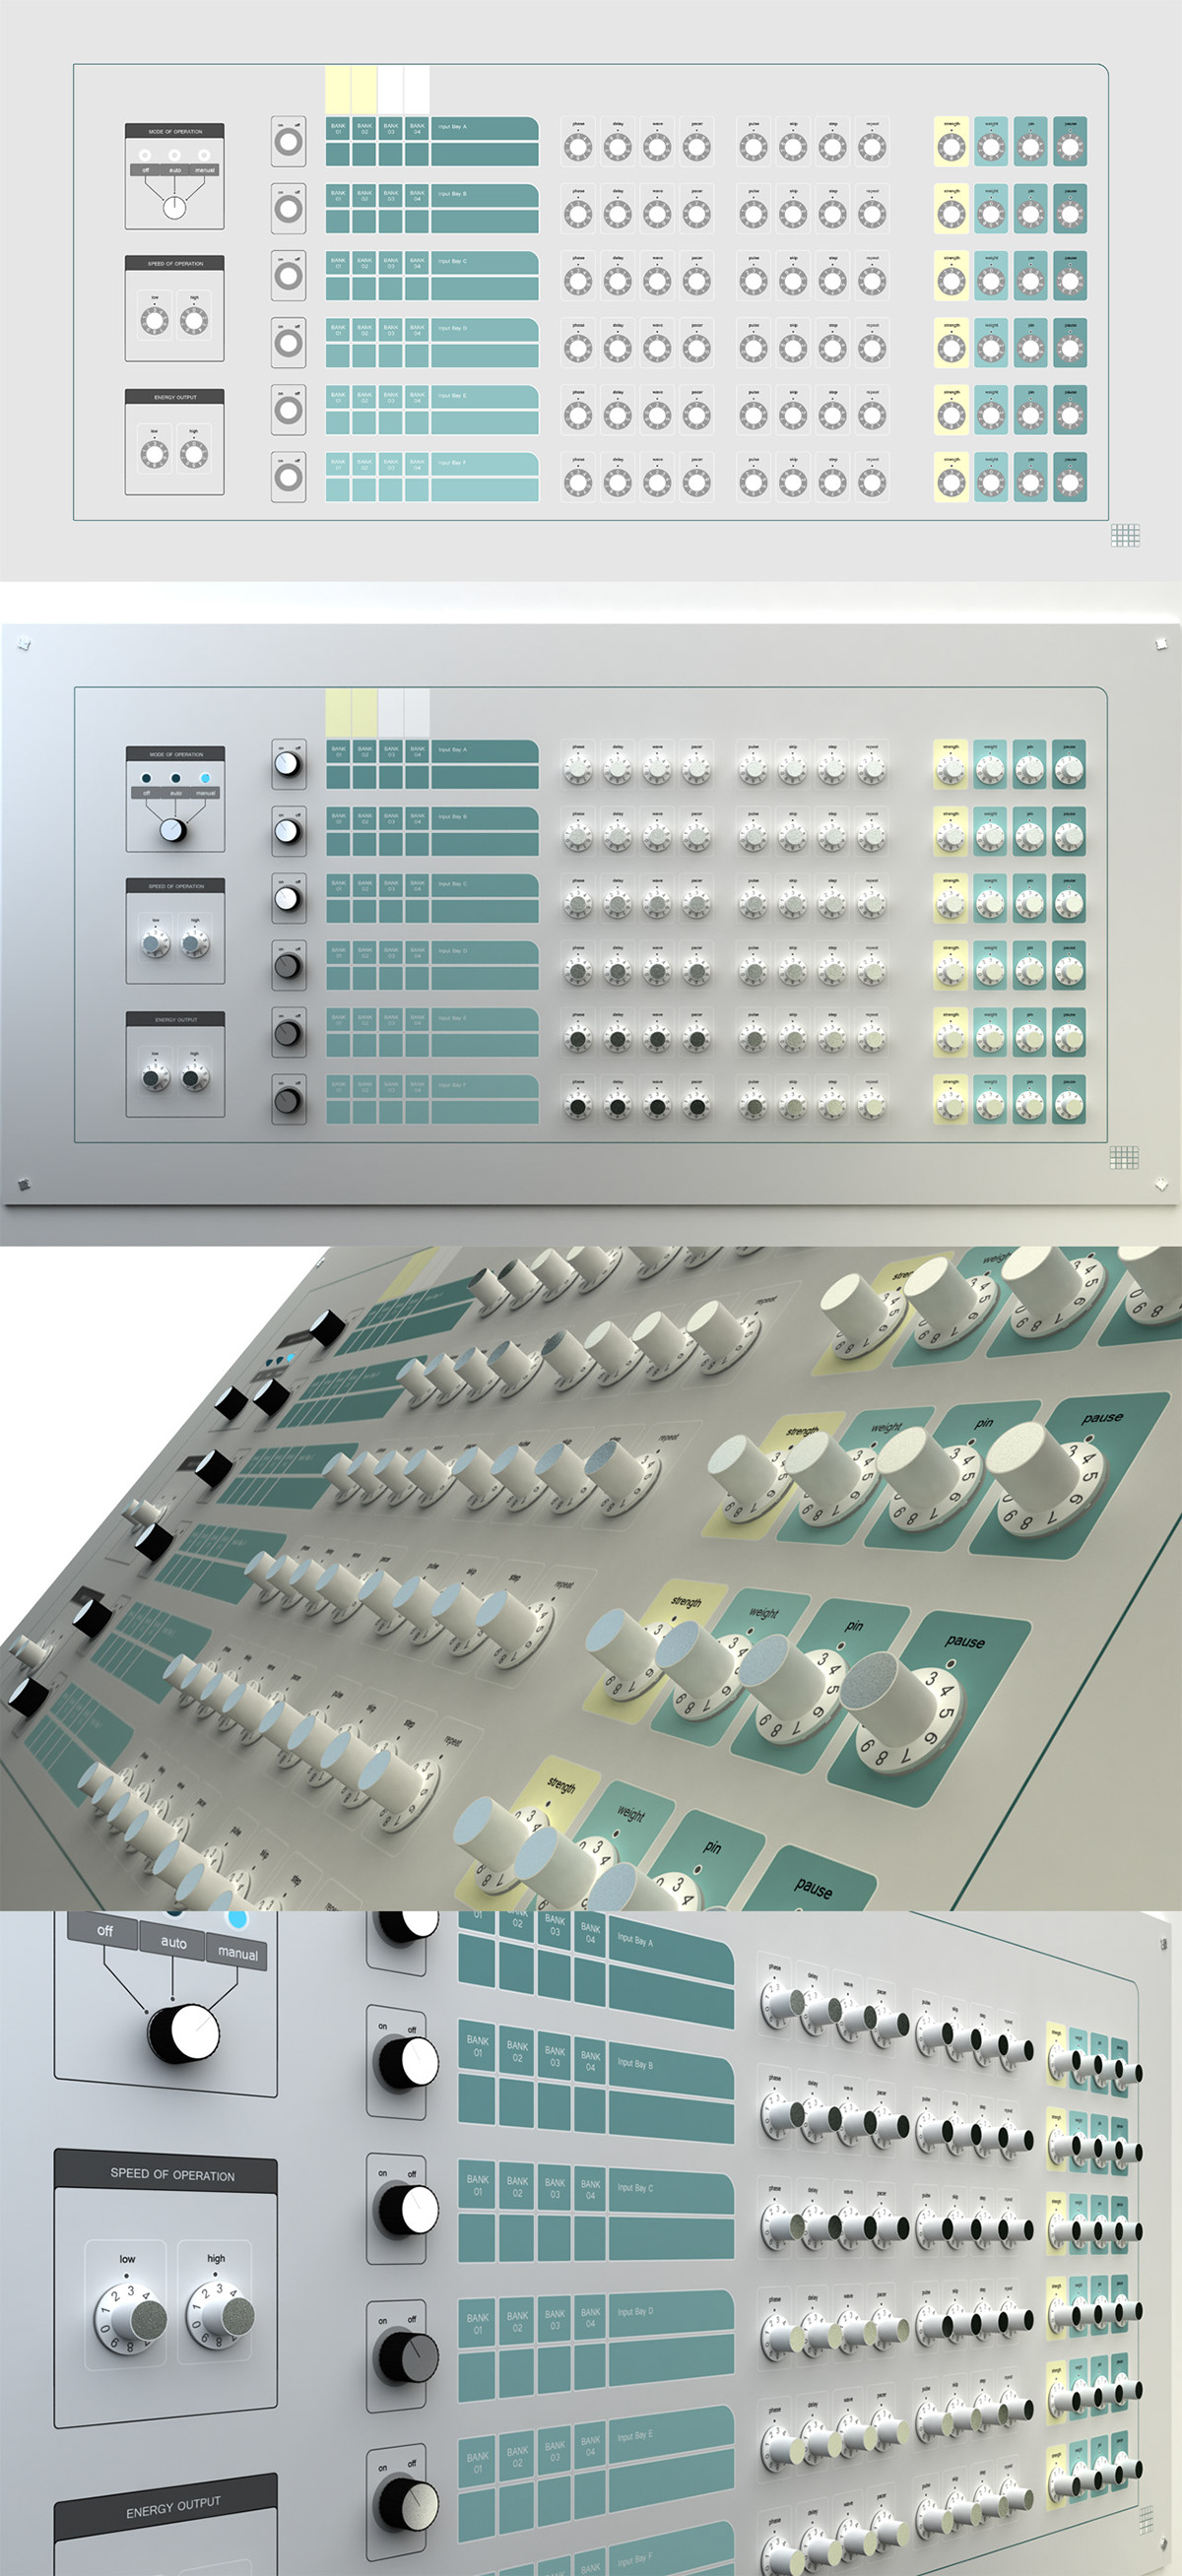 Jason Kan  3dsmax  illustrator  3D Animation  Modeling  texturing  lighting  Rendering  computer  buttons  knobs  consoles   electronics  sci-fi machine